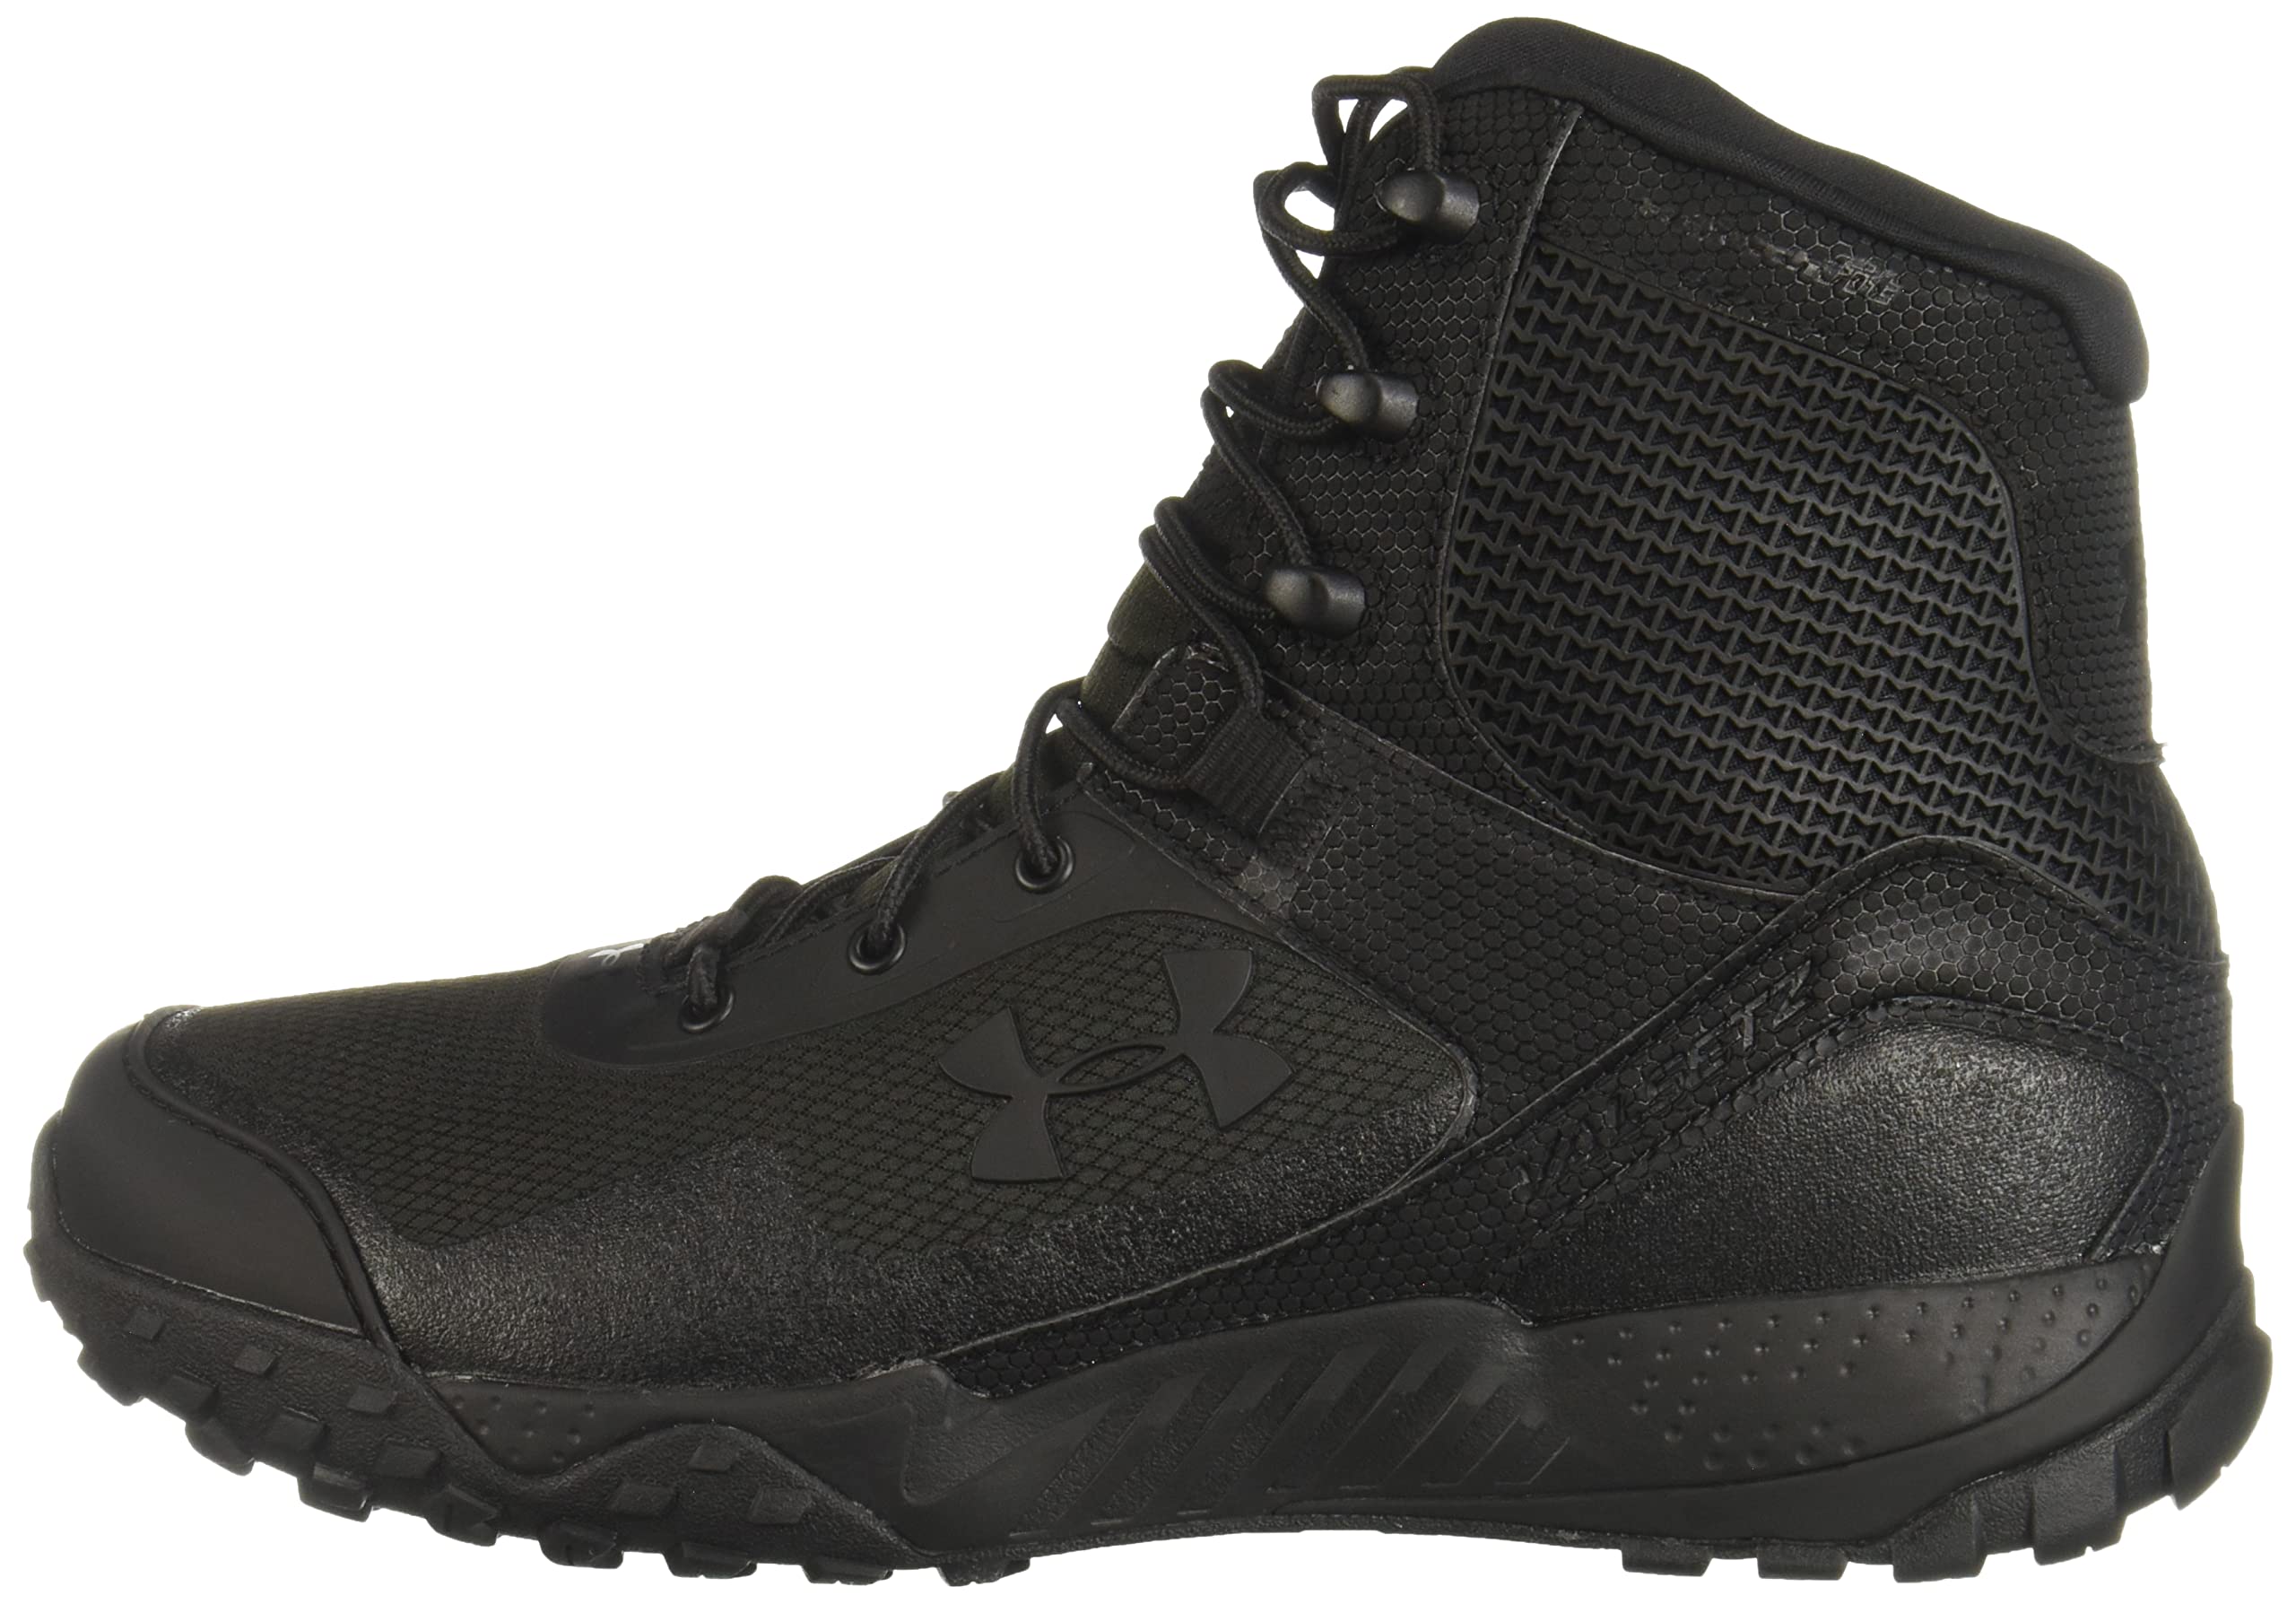 Under Armour Men's Valsetz RTS 1.5 - Wide (4E) Military and Tactical